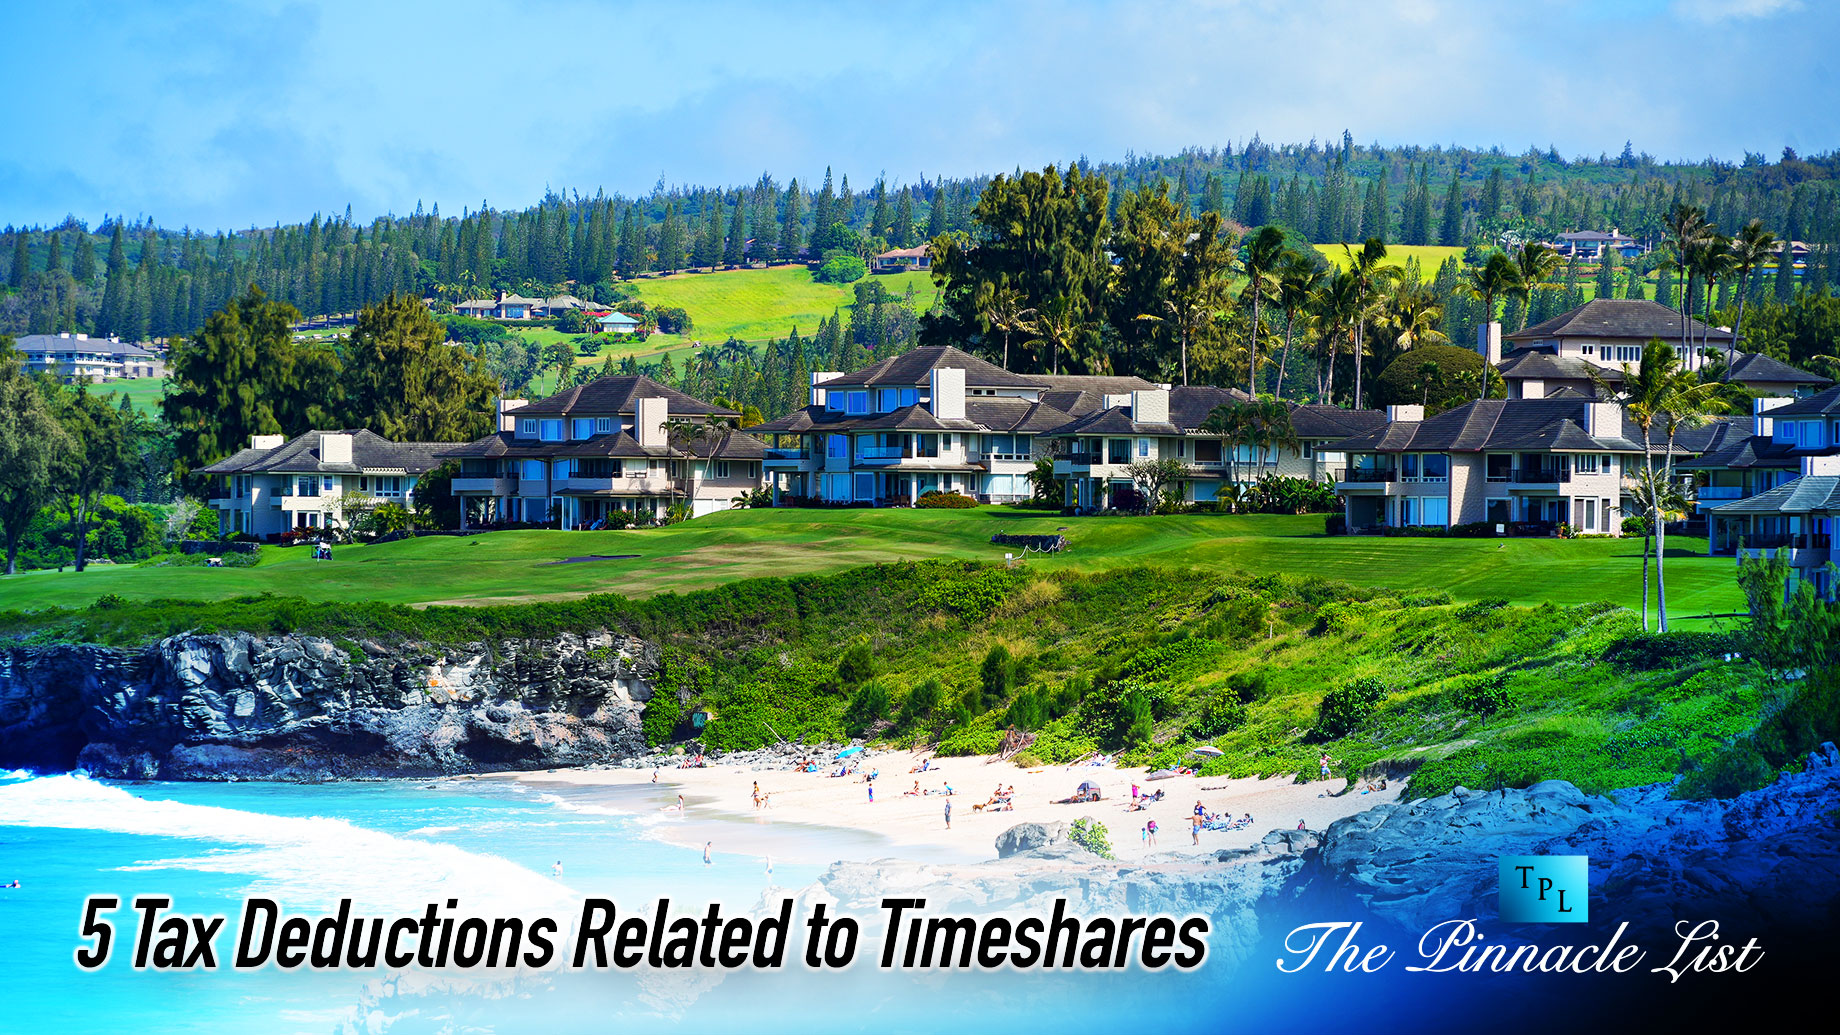 5 Tax Deductions Related to Timeshares